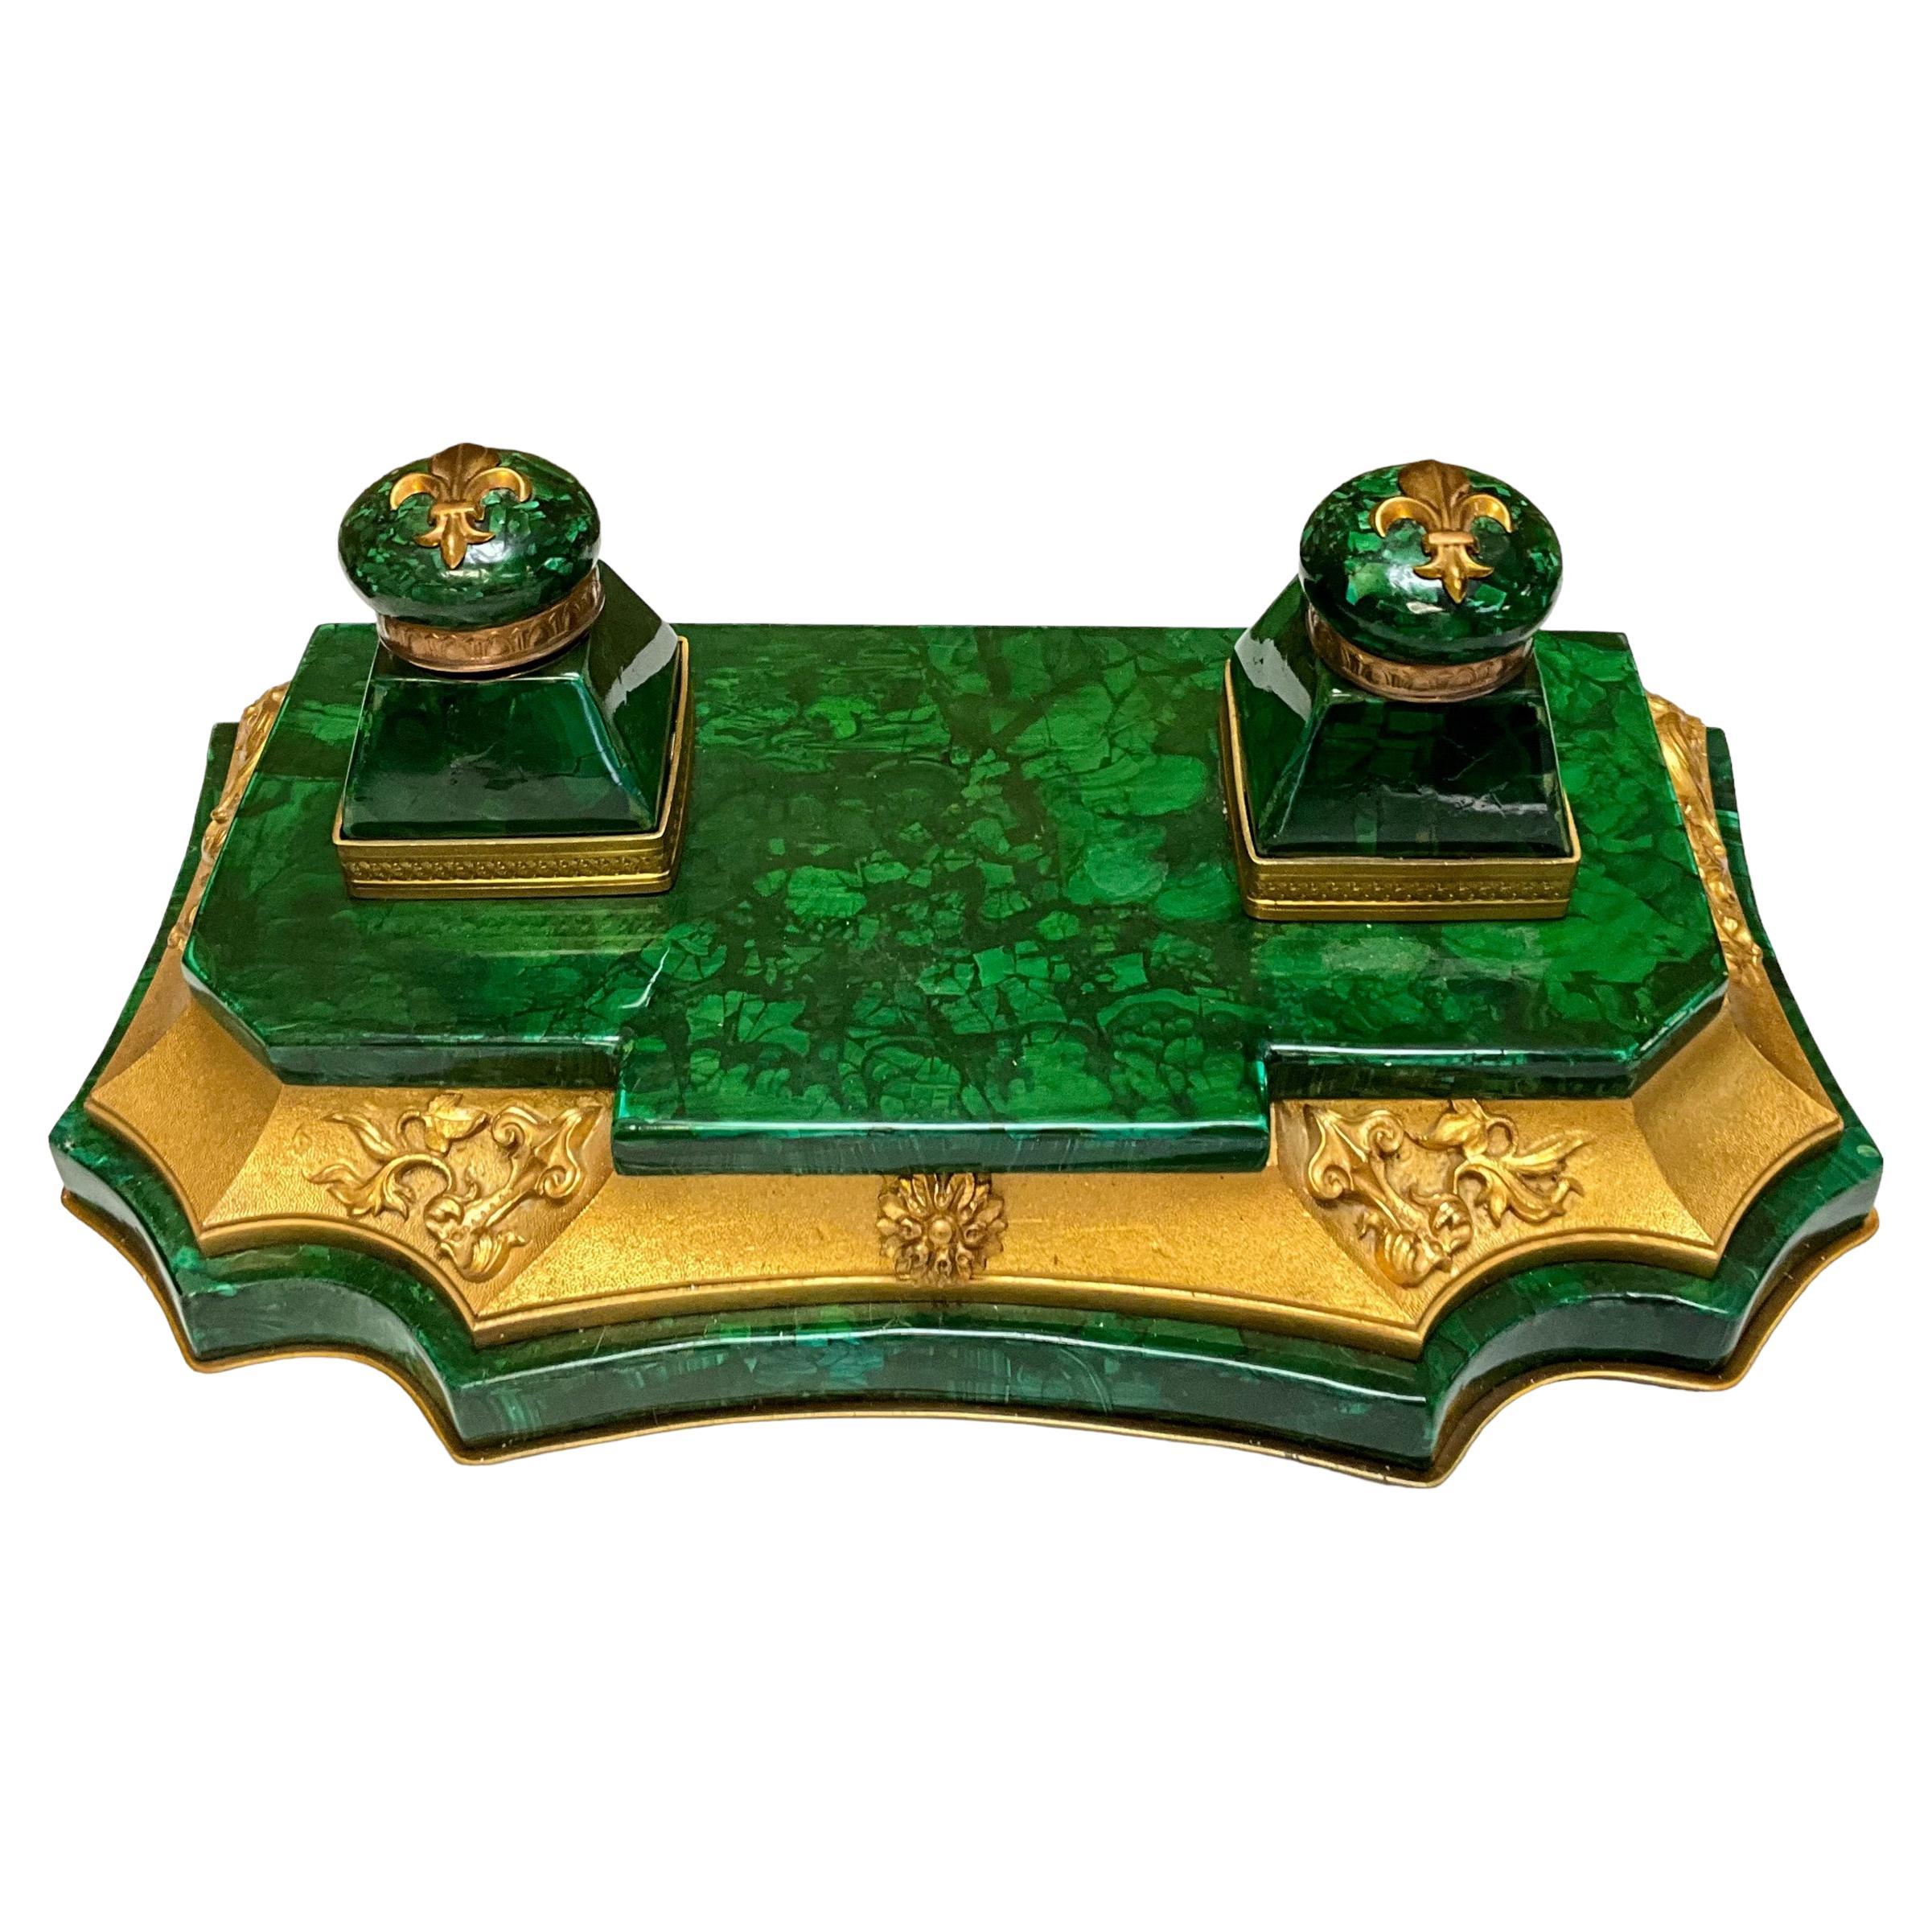 Early 20th-C. French Gilt Bronze And Malachite Desk Pen Inkwell / Inkstand  For Sale